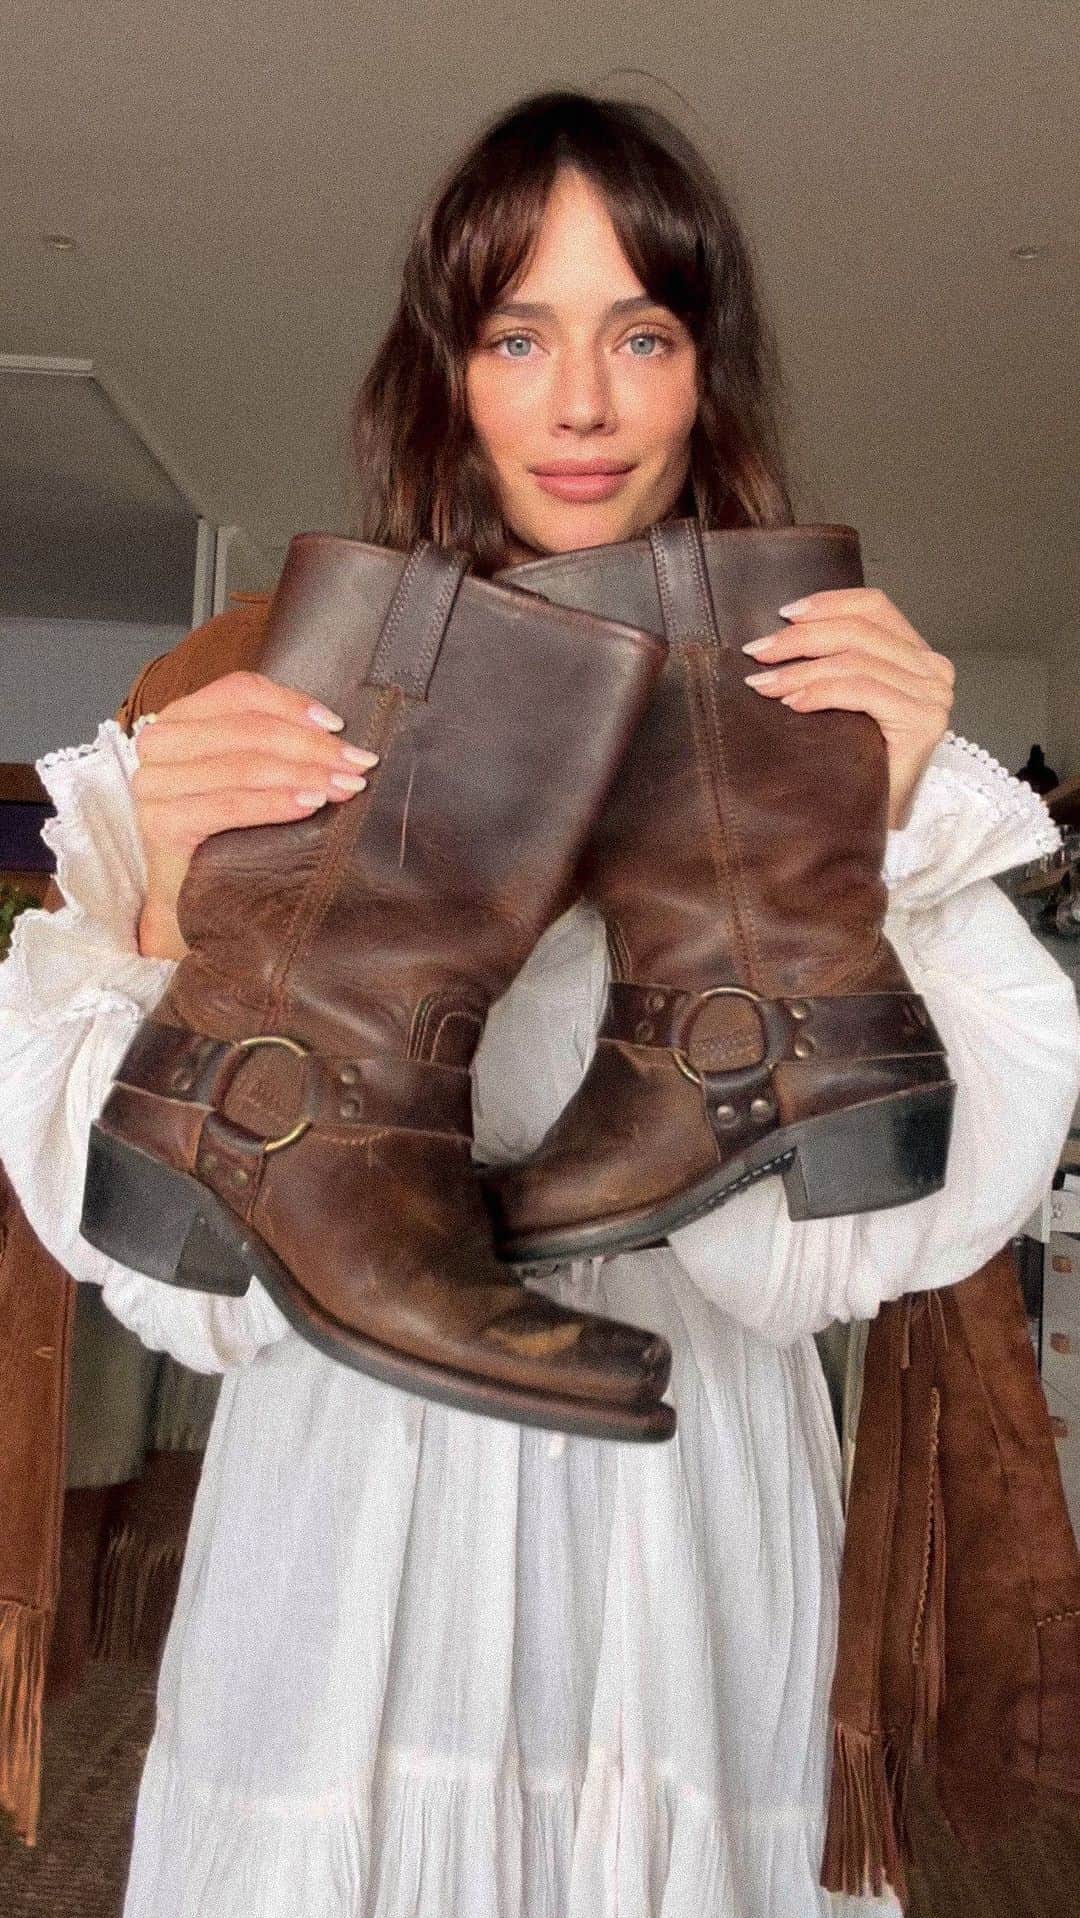 Jessicaのインスタグラム：「Who else loves an old pair of boots? (Even if they are a size too big)   Dress: @nalini_shop  Jacket:  not sure on the brand but you can find similar on DEPOP for sure Boots: they are vintage Frye boots, I have found similar on DEPOP, Vestiaire Collective and eBay   I’m wearing thermal tights underneath my dress as it’s still pretty cold here!  #ootd #boots #vintageboots #vintagejacket」